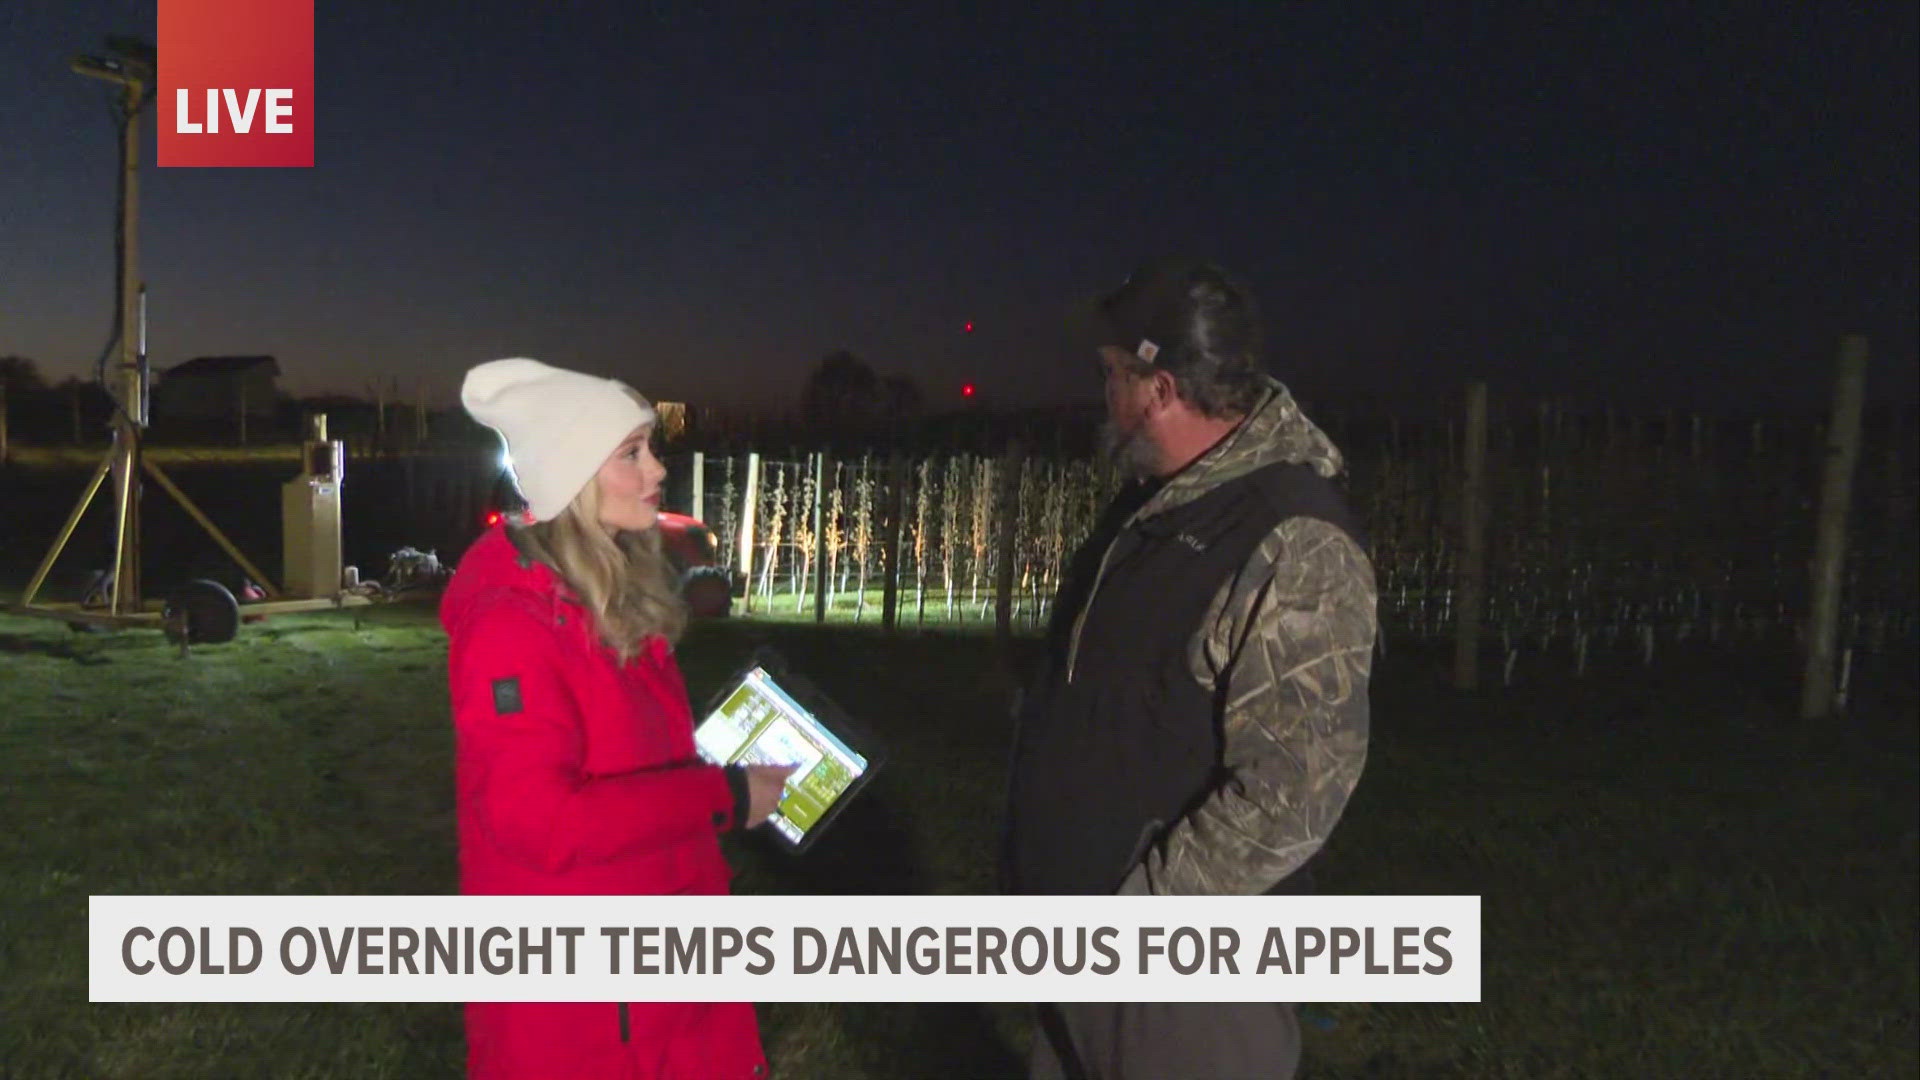 While below-freezing temperatures won't last all day, they could still be devastating. We spoke with farmers to learn how they're protecting their crops.